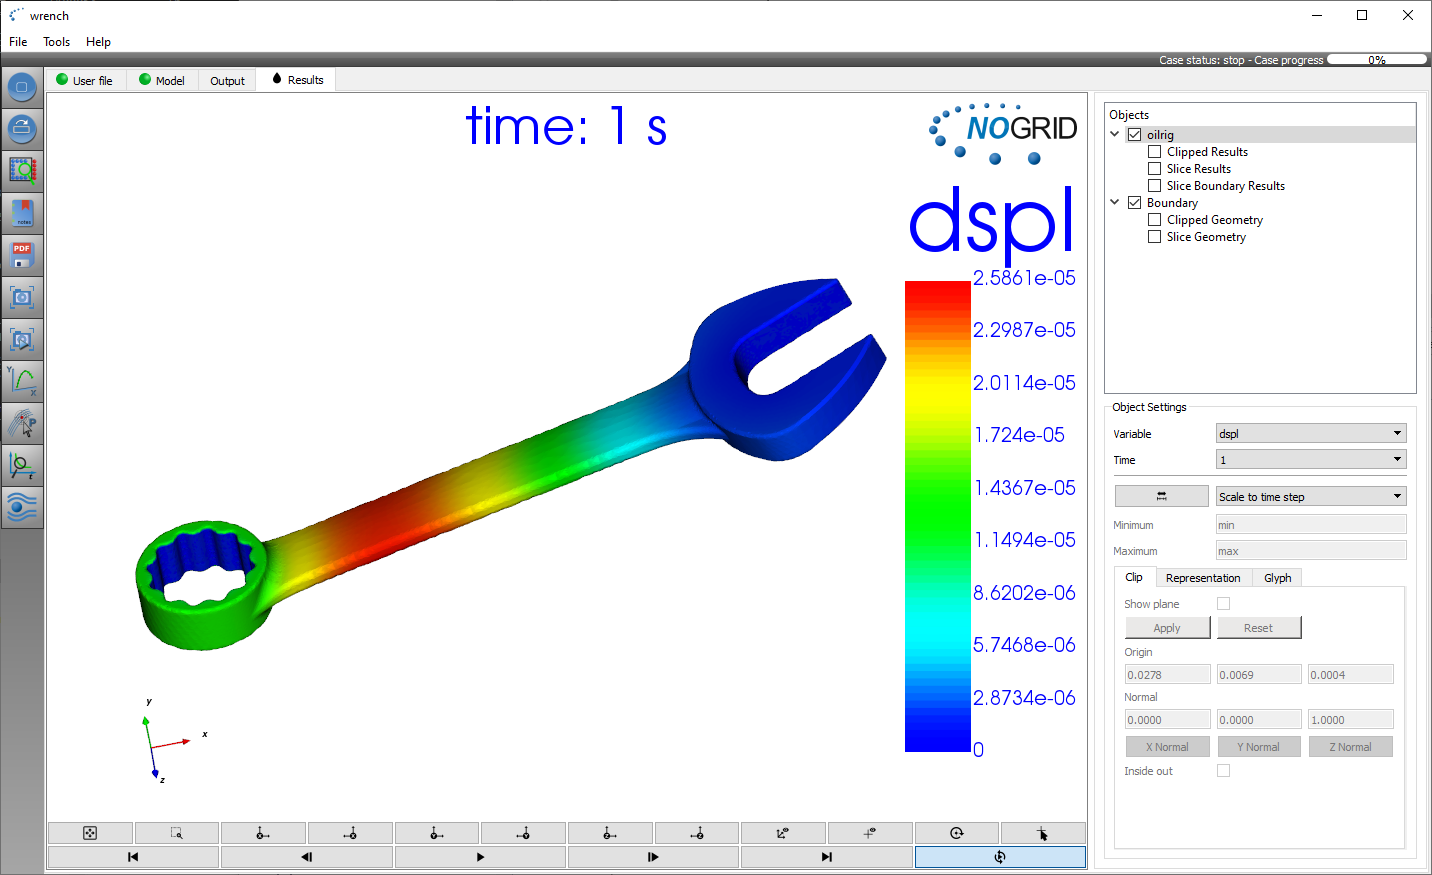 Wrench tool stress analysis GUI results in NOGRID points CFD software